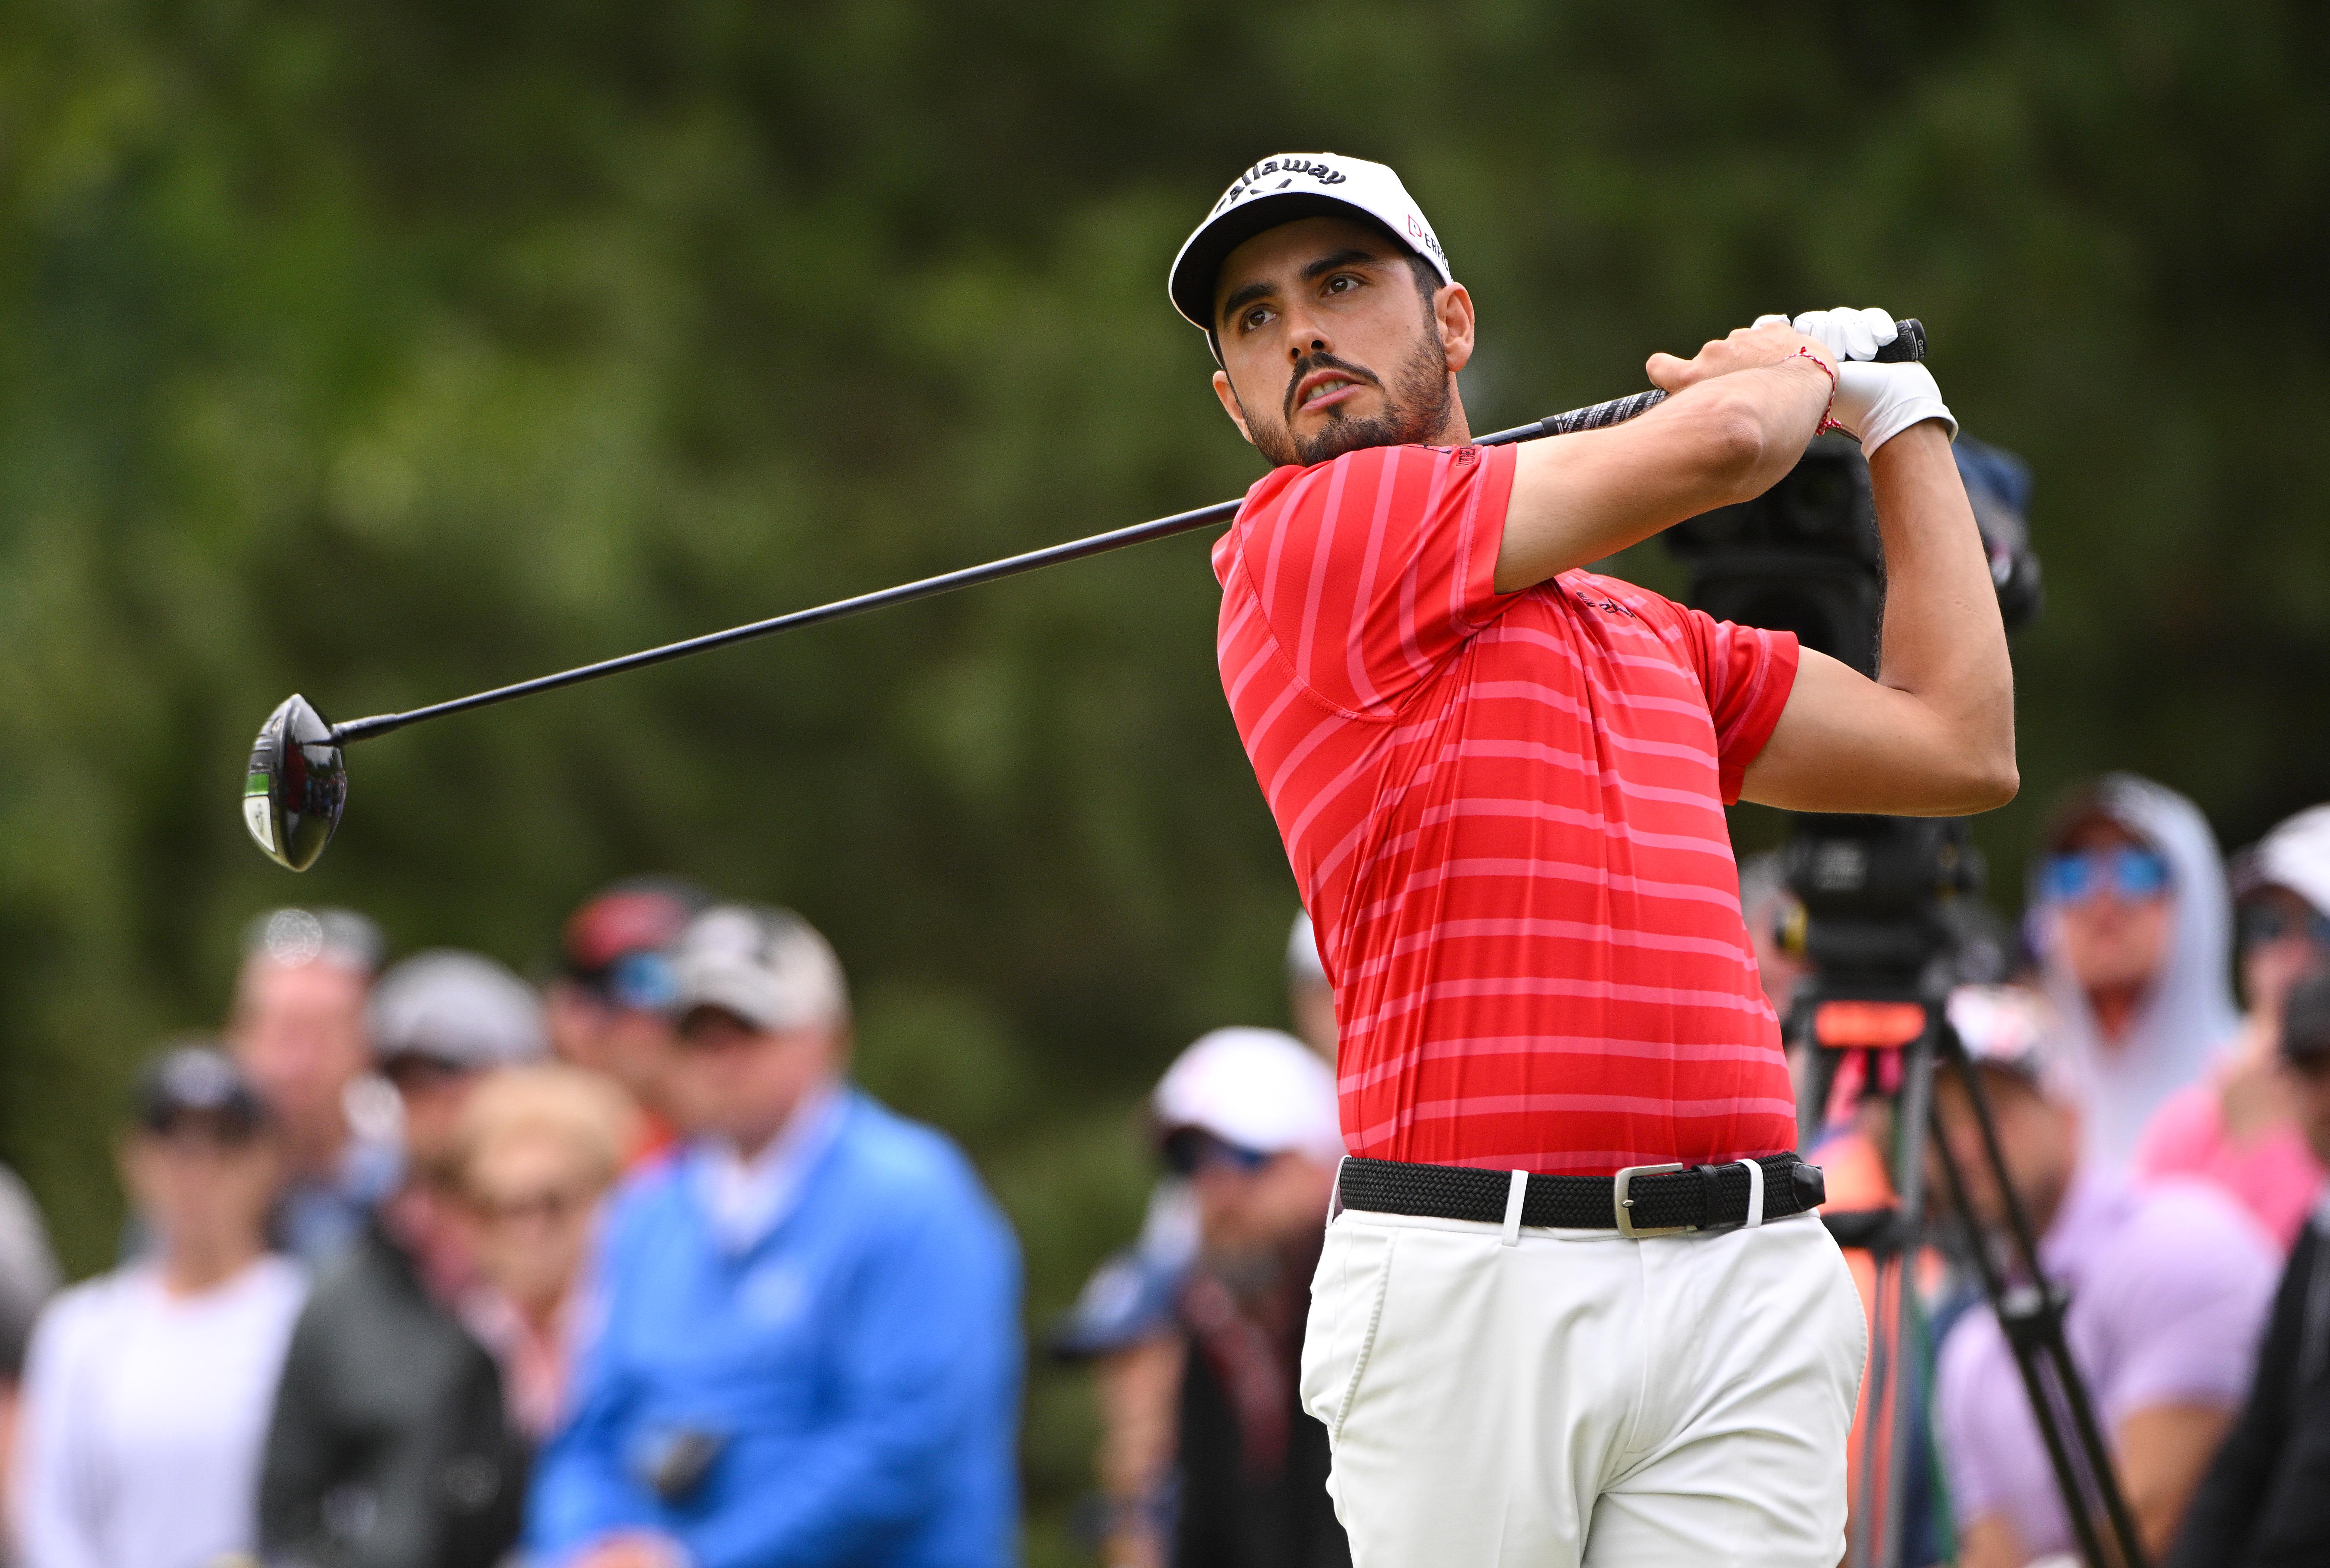 Abraham Ancer U.S. Open 2022 Odds, History & Predictions